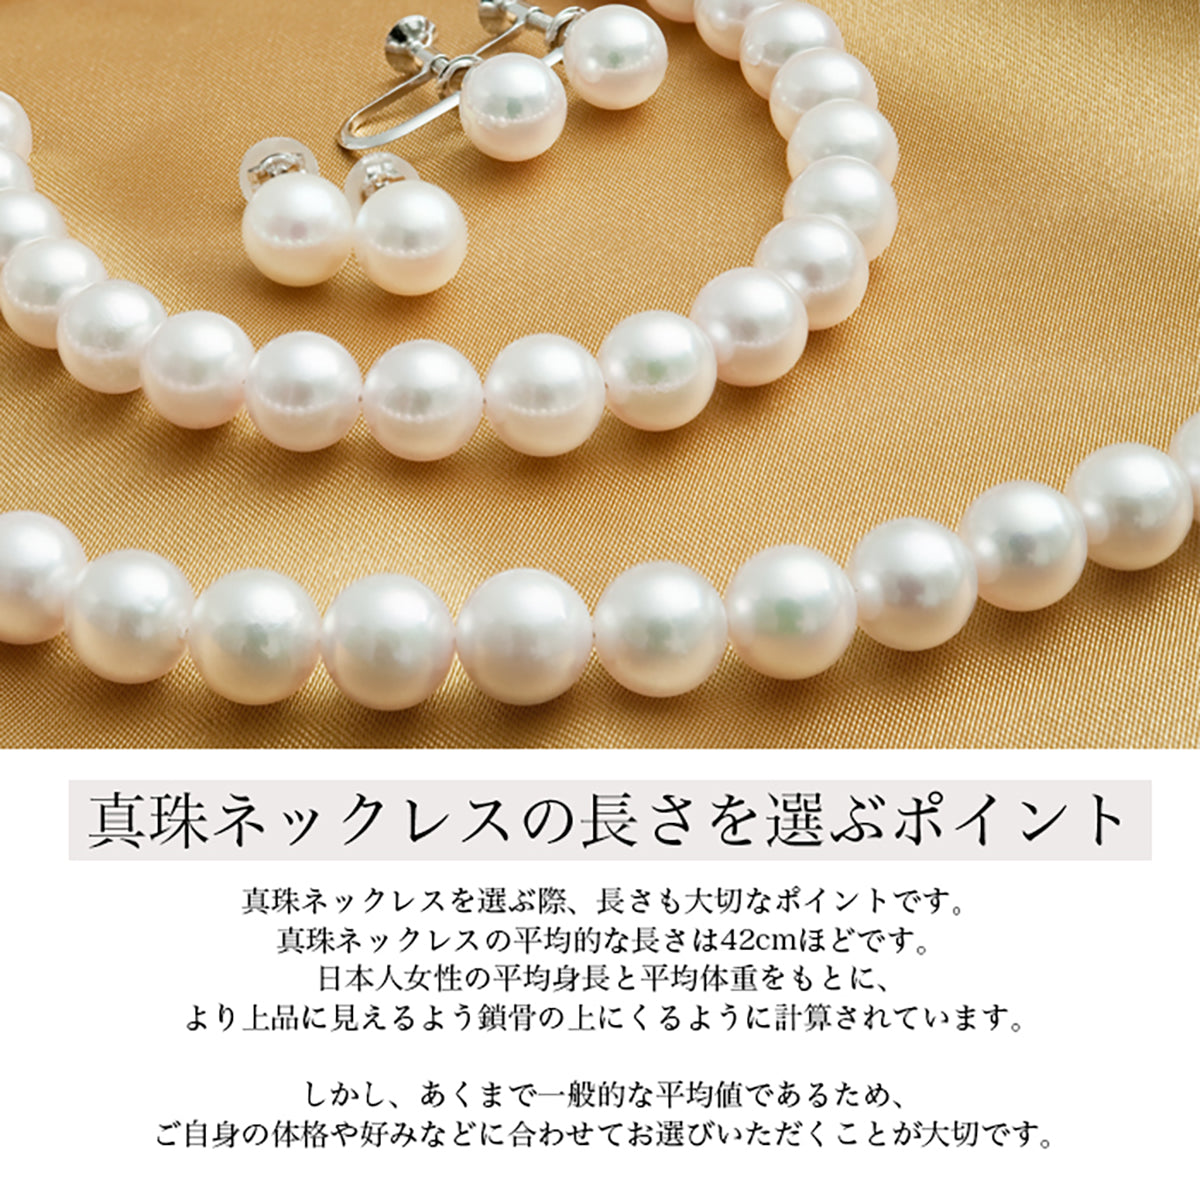 Hanadama Pearl Formal Necklace Set of 2 [8.0-8.5mm] (Earrings included) Formal Set with Certificate of Authenticity and Storage Case for Ceremonial Occasions